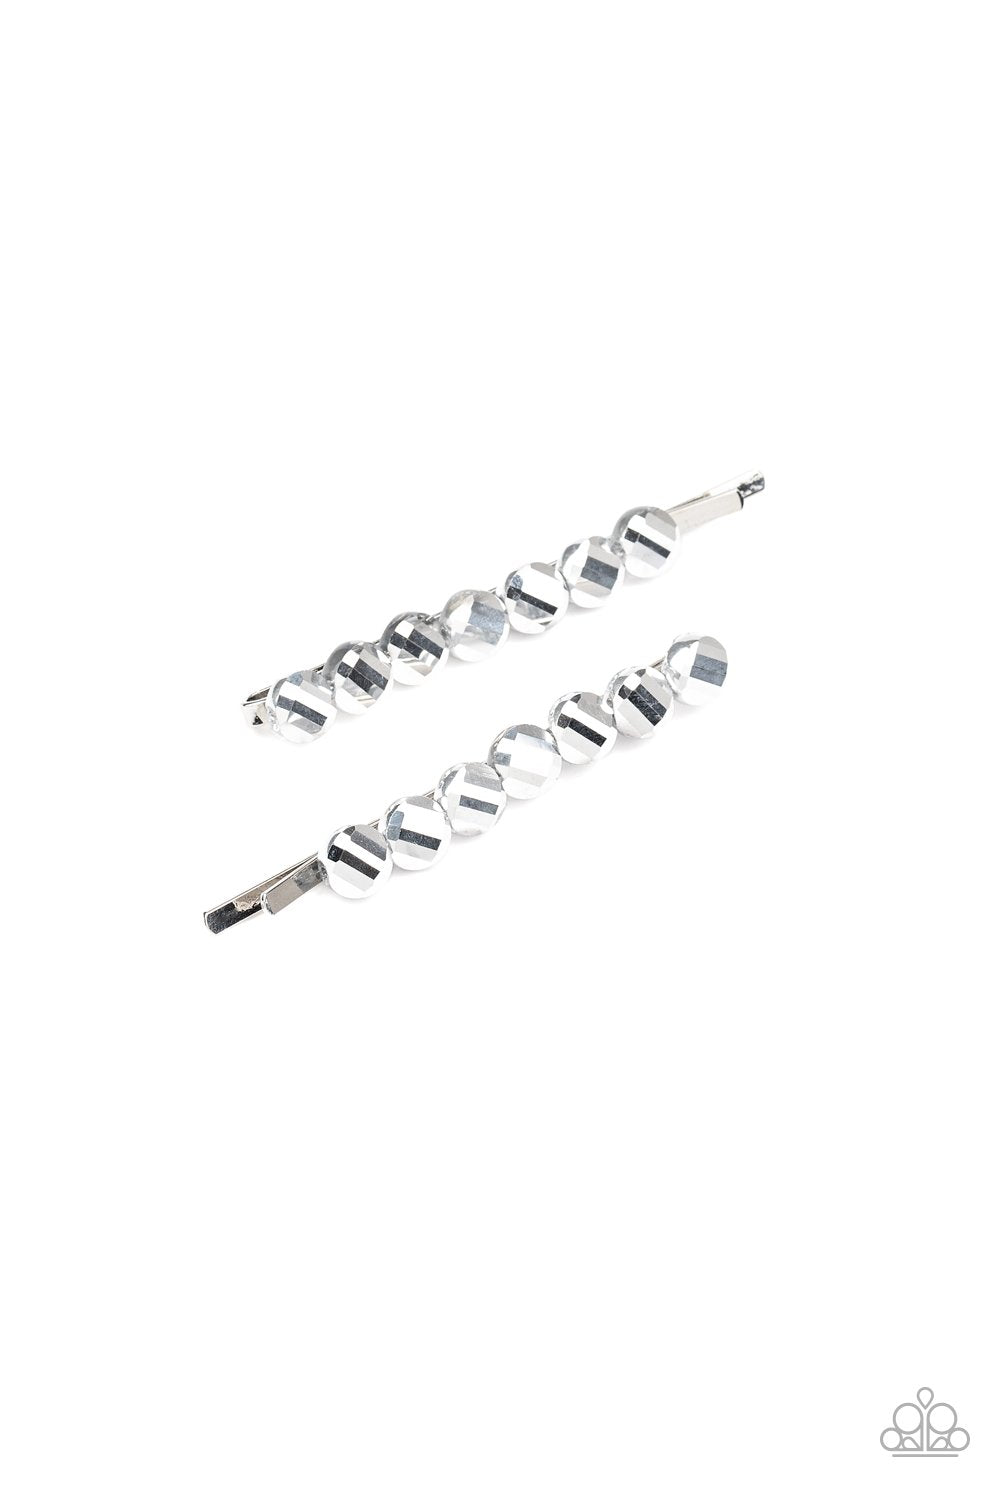 Easy On The Hairspray Silver Hematite Hair Pins - Paparazzi Accessories-CarasShop.com - $5 Jewelry by Cara Jewels